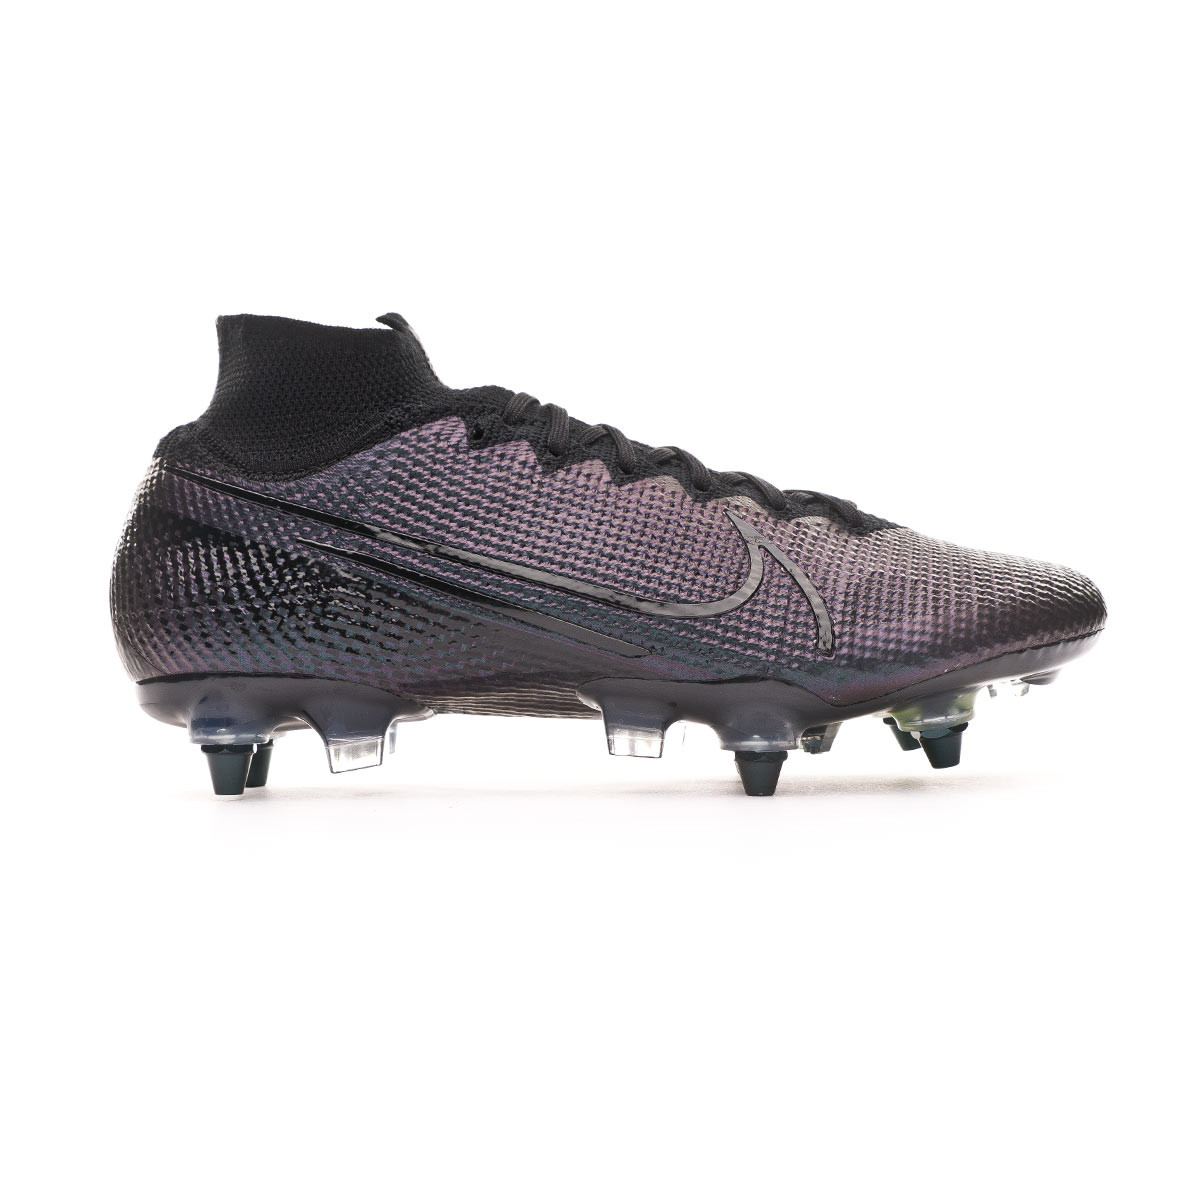 Mercurial Superfly 7 Elite FG Firm Ground Soccer Cleat.